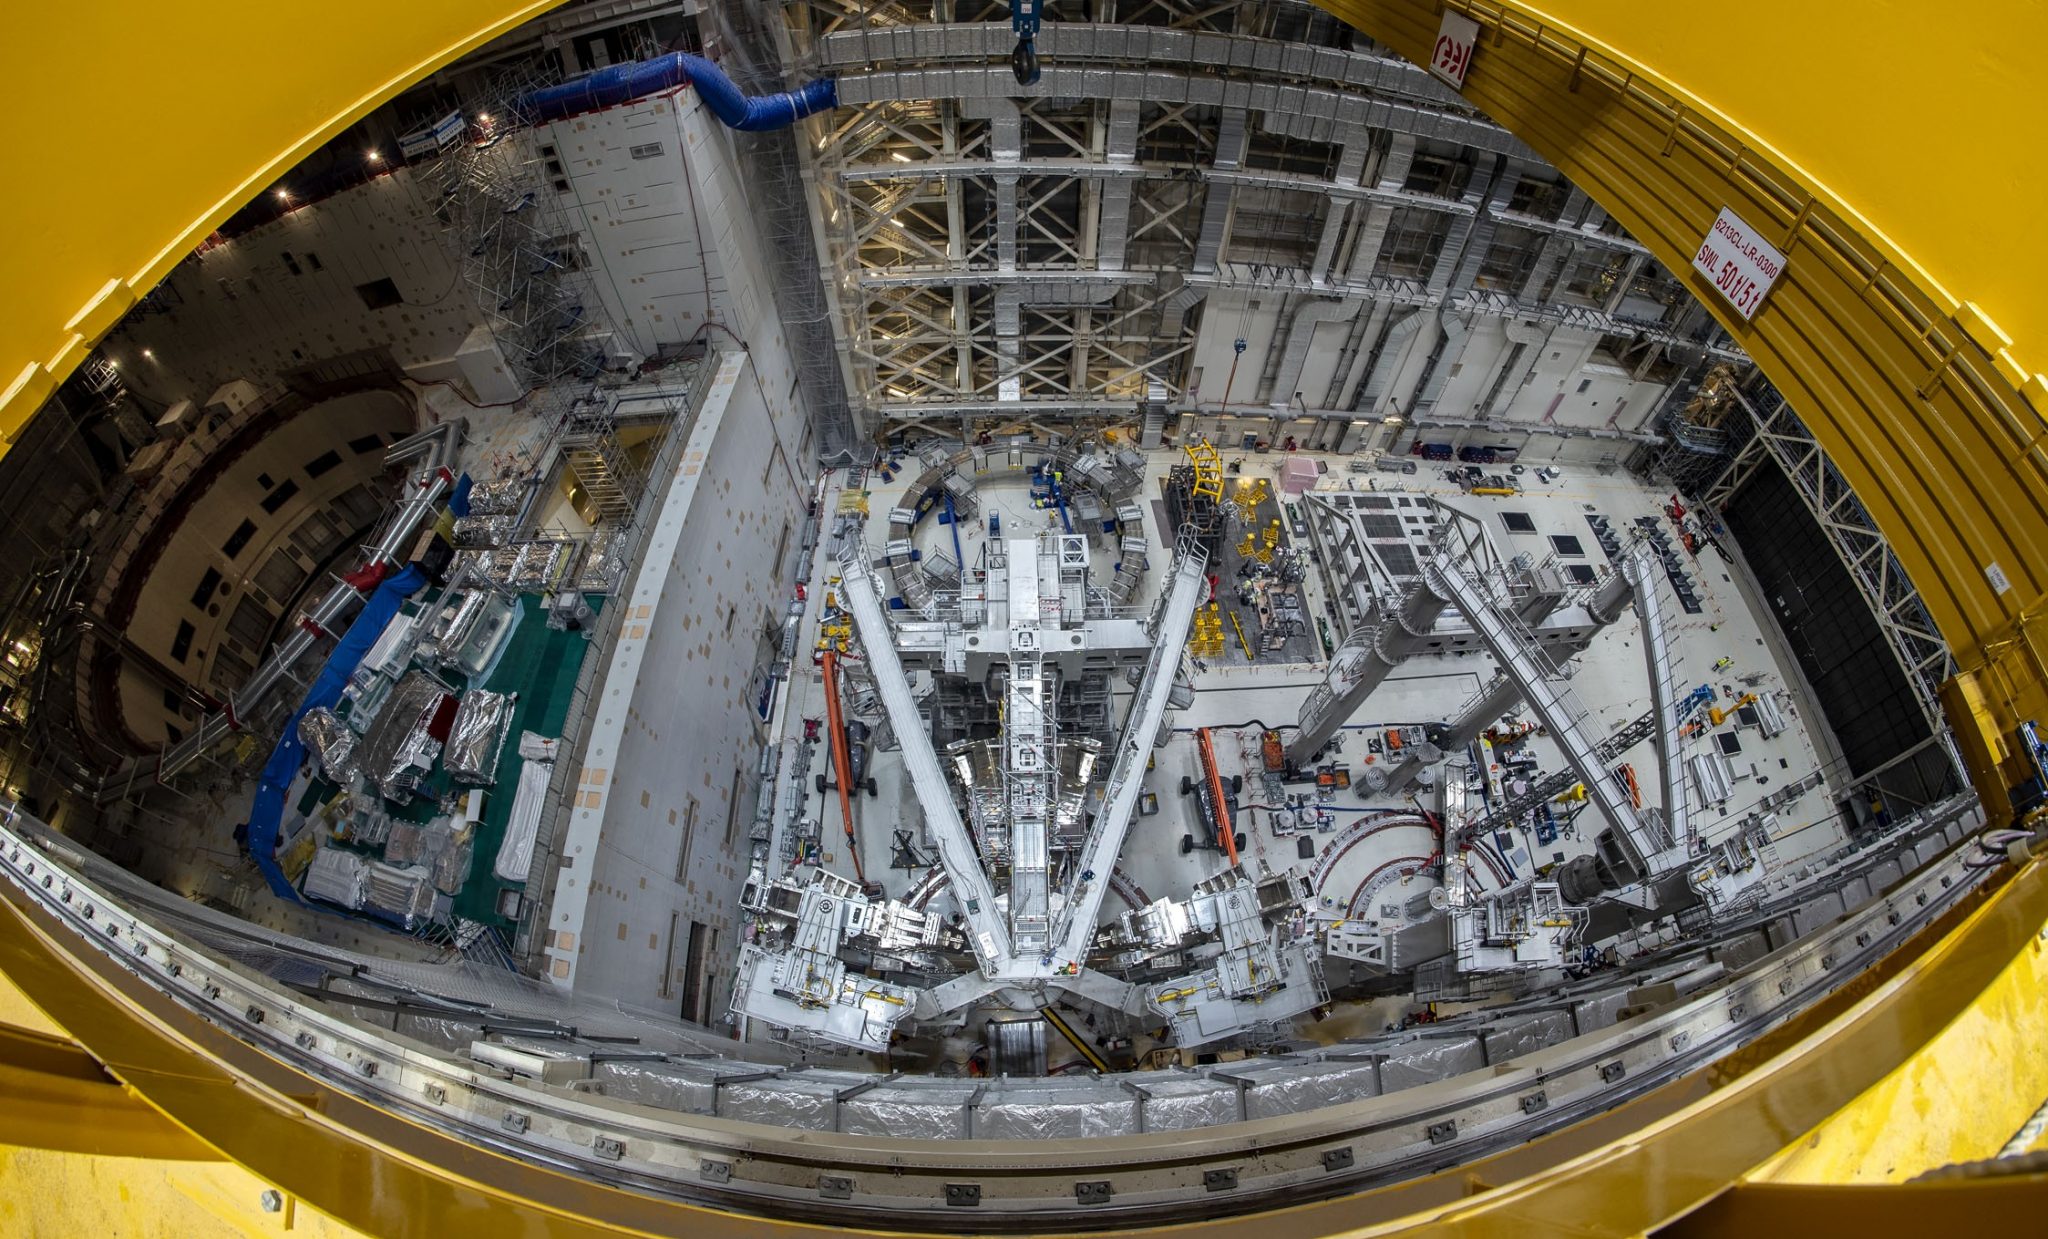 PHOTO: The International Thermonuclear Experimental Reactor (ITER) is a collaborative nuclear fusion research and engineering project aiming to build the world’s largest magnetic fusion device, also known as a tokamak, in southern France. CREDIT: ITER Organization